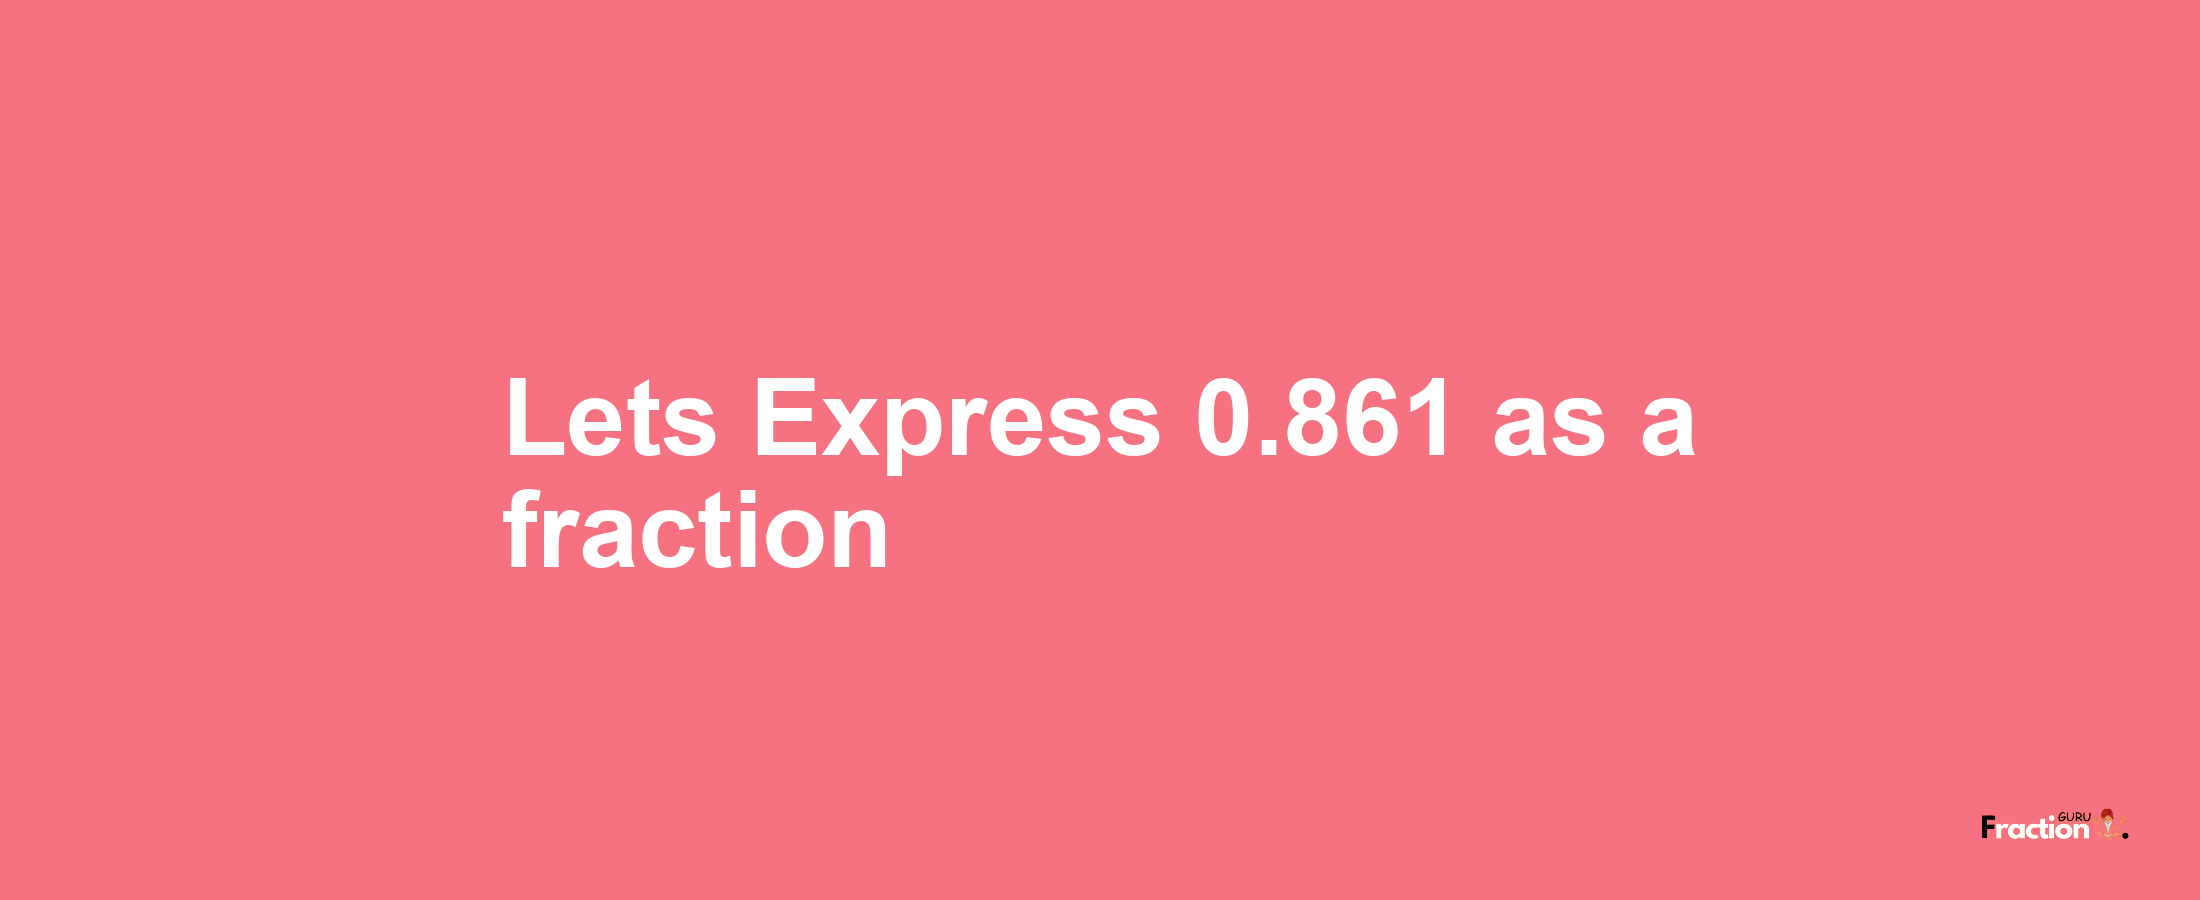 Lets Express 0.861 as afraction